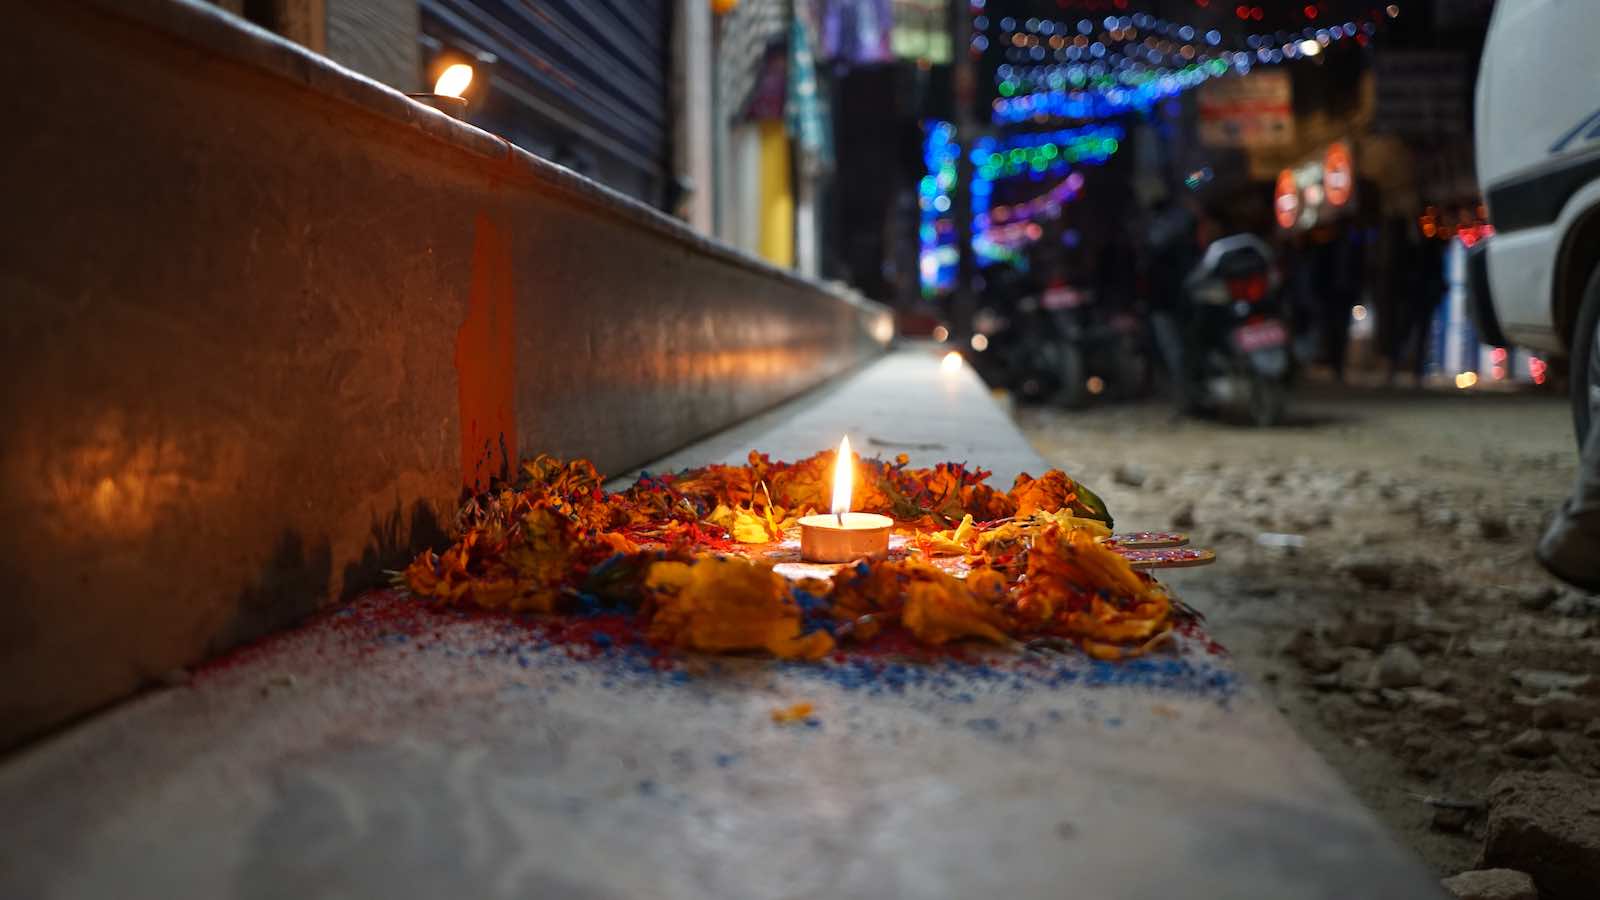 I got here right during Diwali, and on one of the nights every shop put out these offerings or a colorful flower pattern called Rangoli in front of their shop.